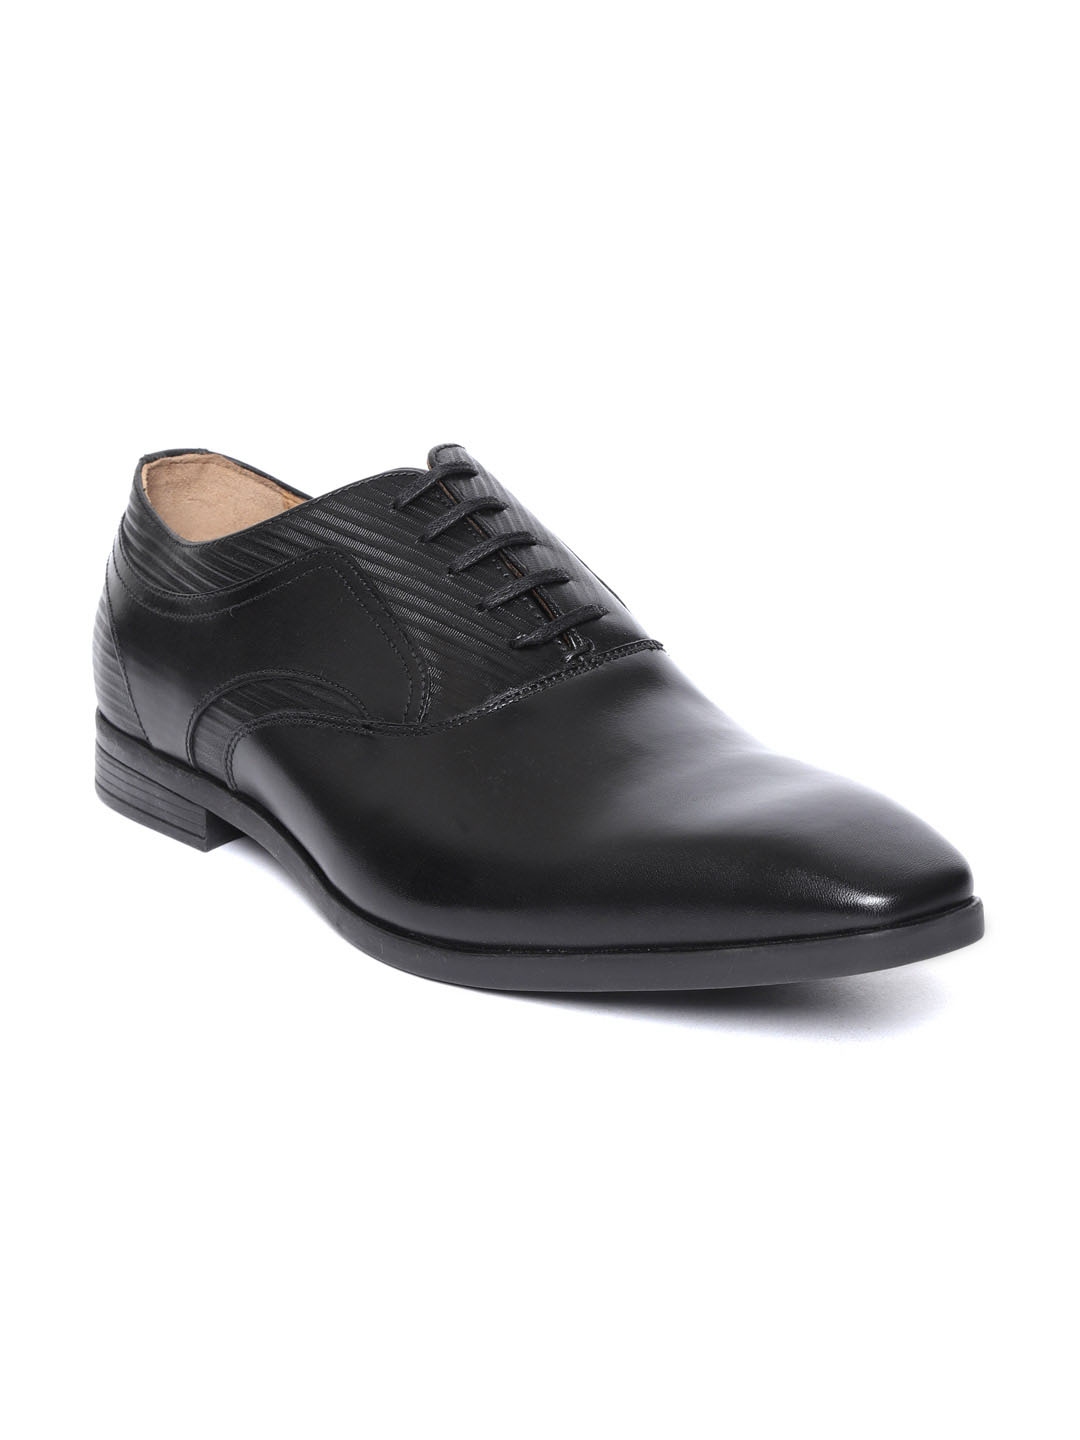 Buy Louis Philippe Men Black Leather Formal Oxfords - Formal Shoes for ...